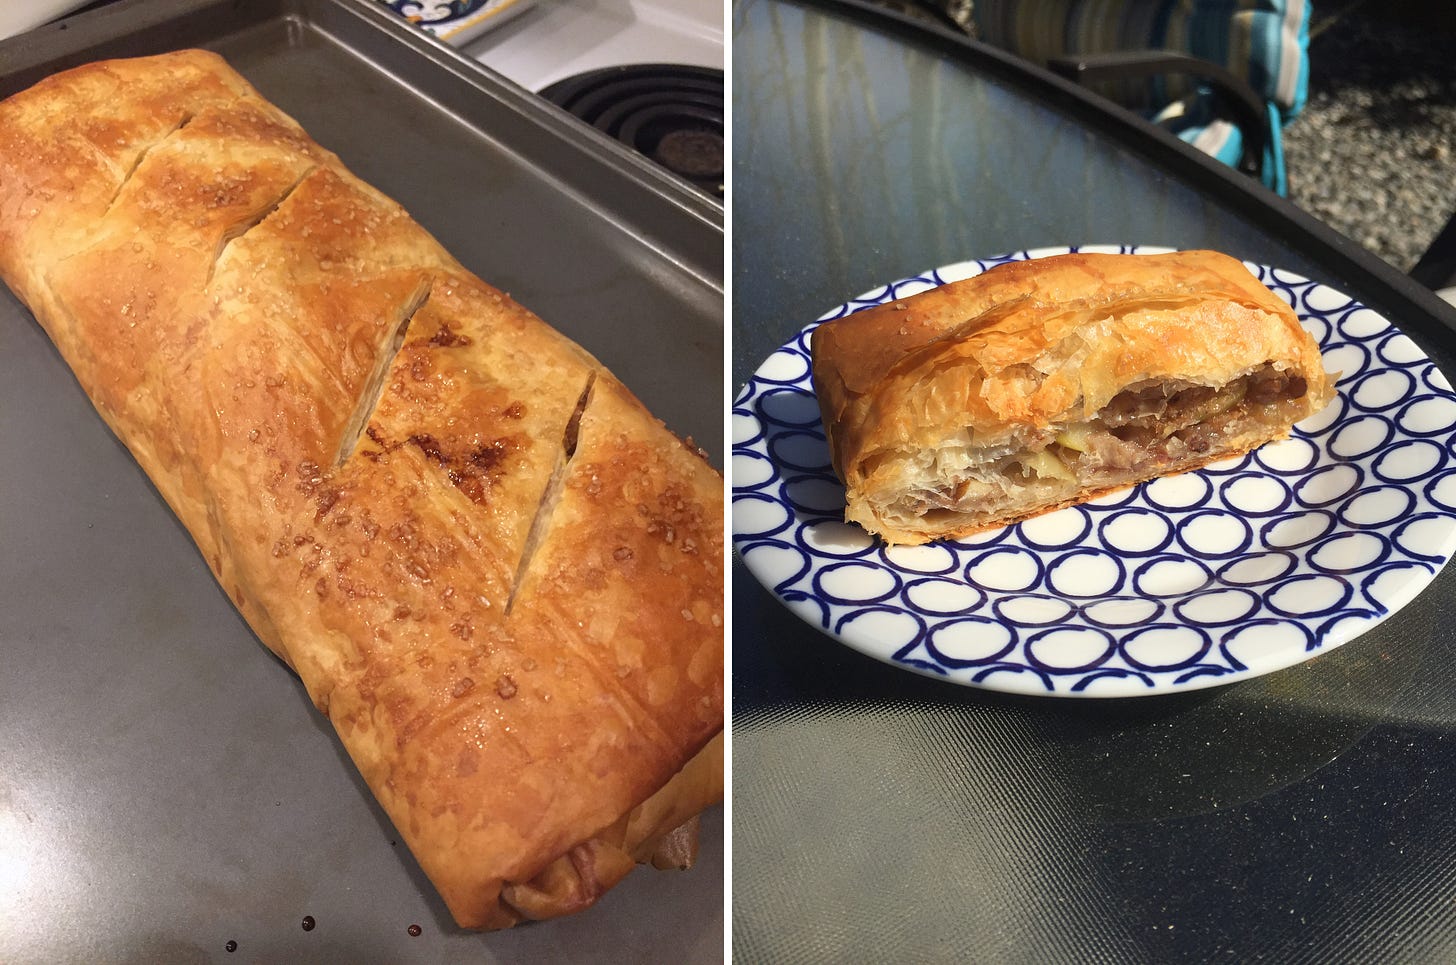 left image: a full-size strudel with diagonal vents cut in the top, resting on a baking sheet. right image: a slice of the strudel on a patterned plate. flakes of pastry and pieces of apple are visible.